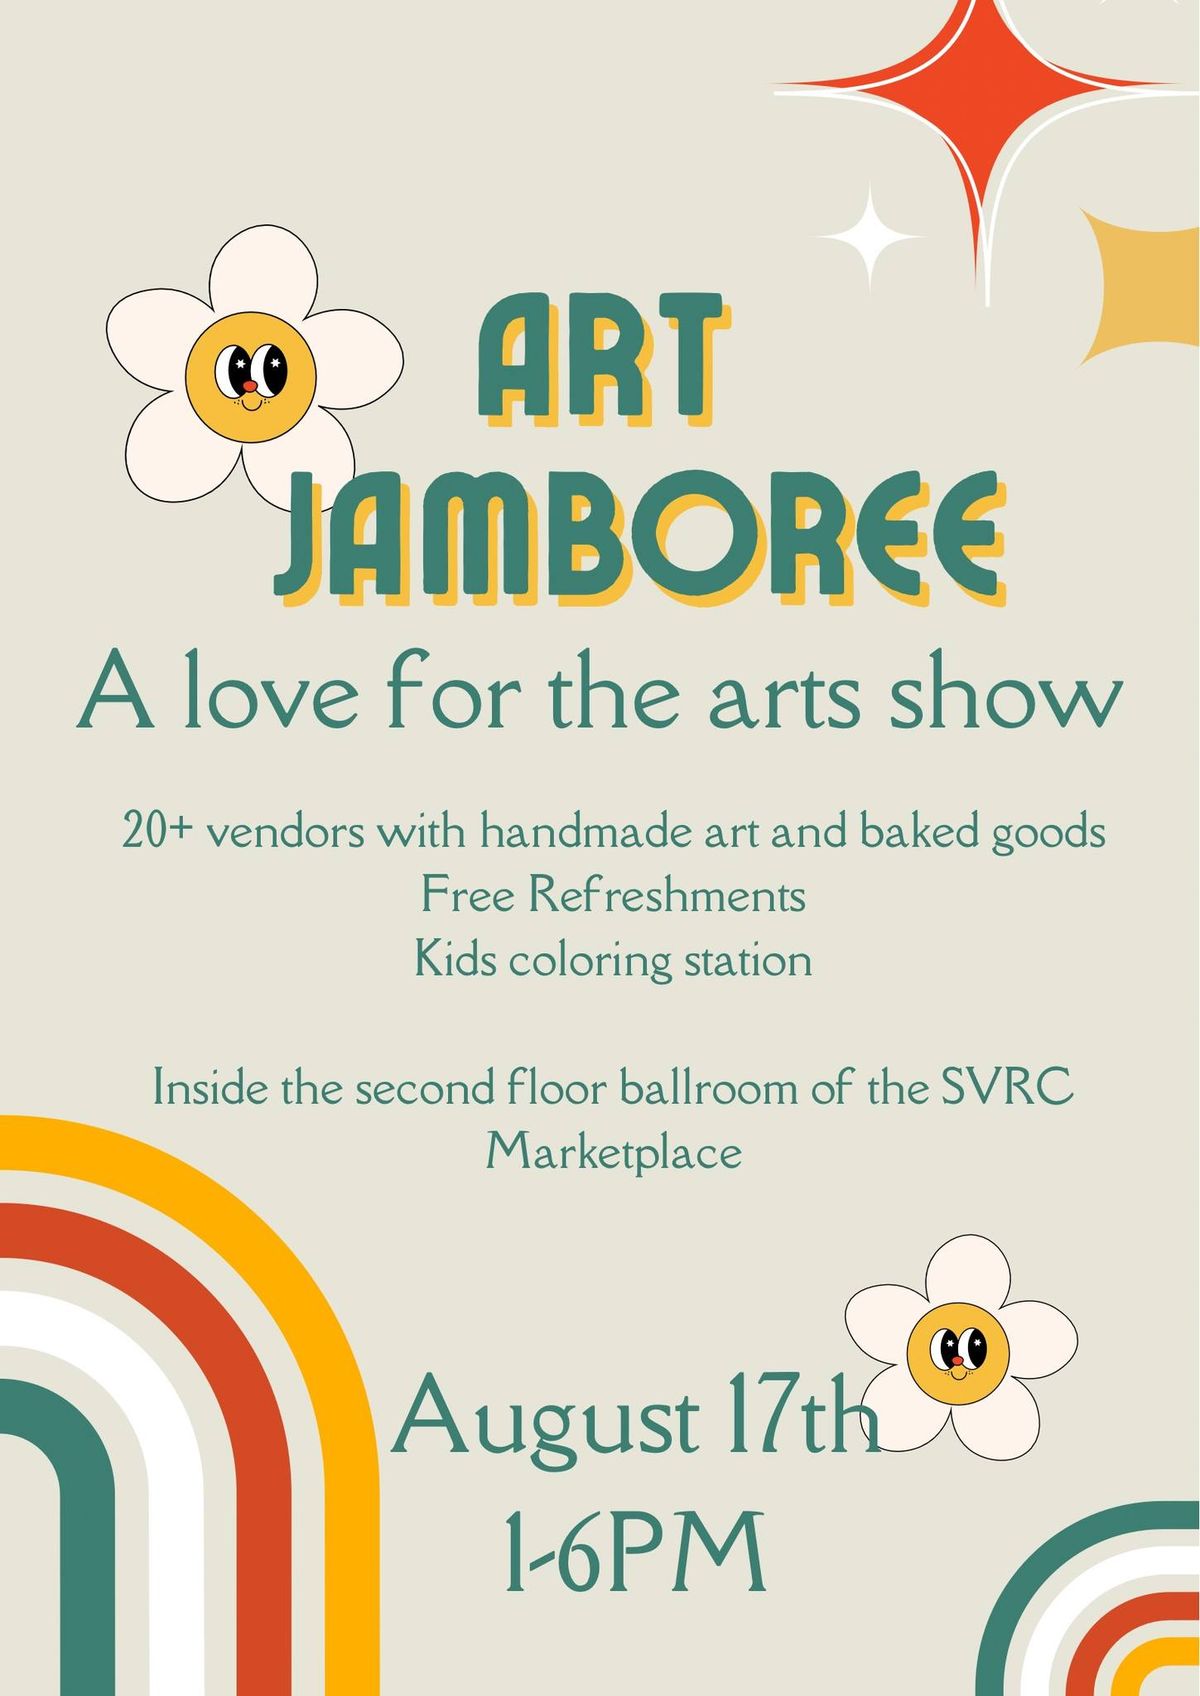 Art jamboree: a love for the arts show